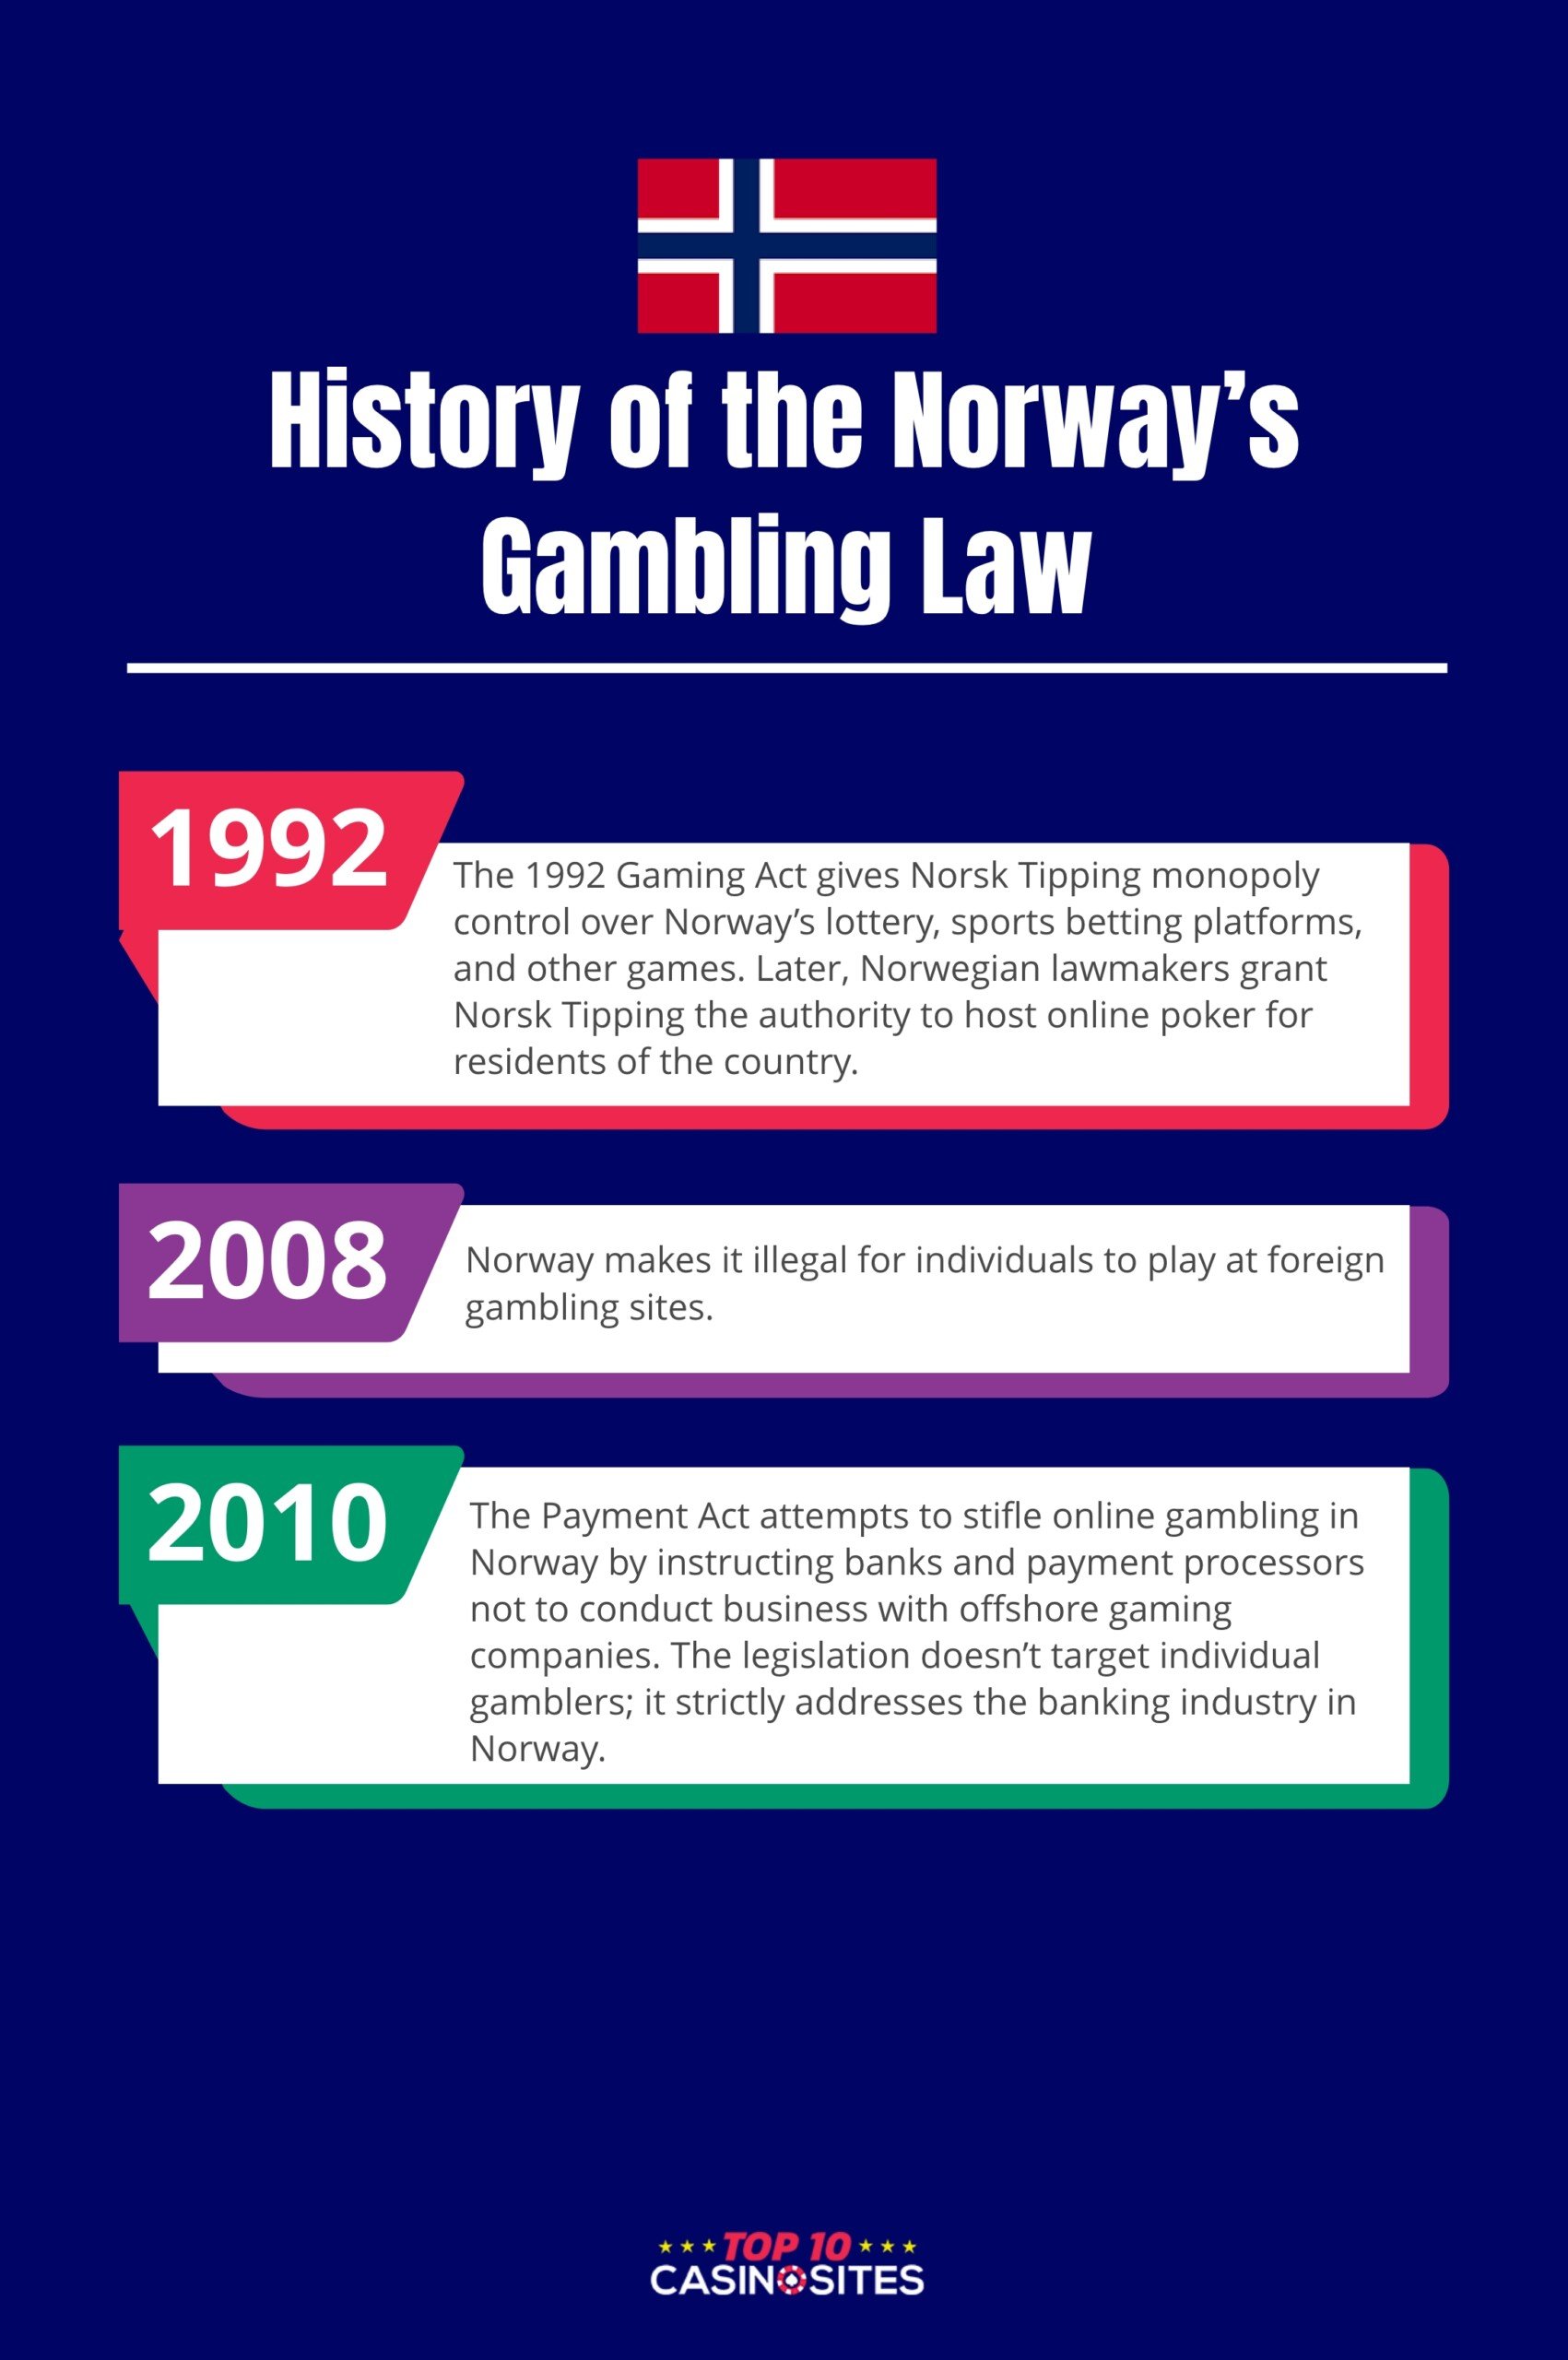 An infographic of the history of Norway's' Gambling Law